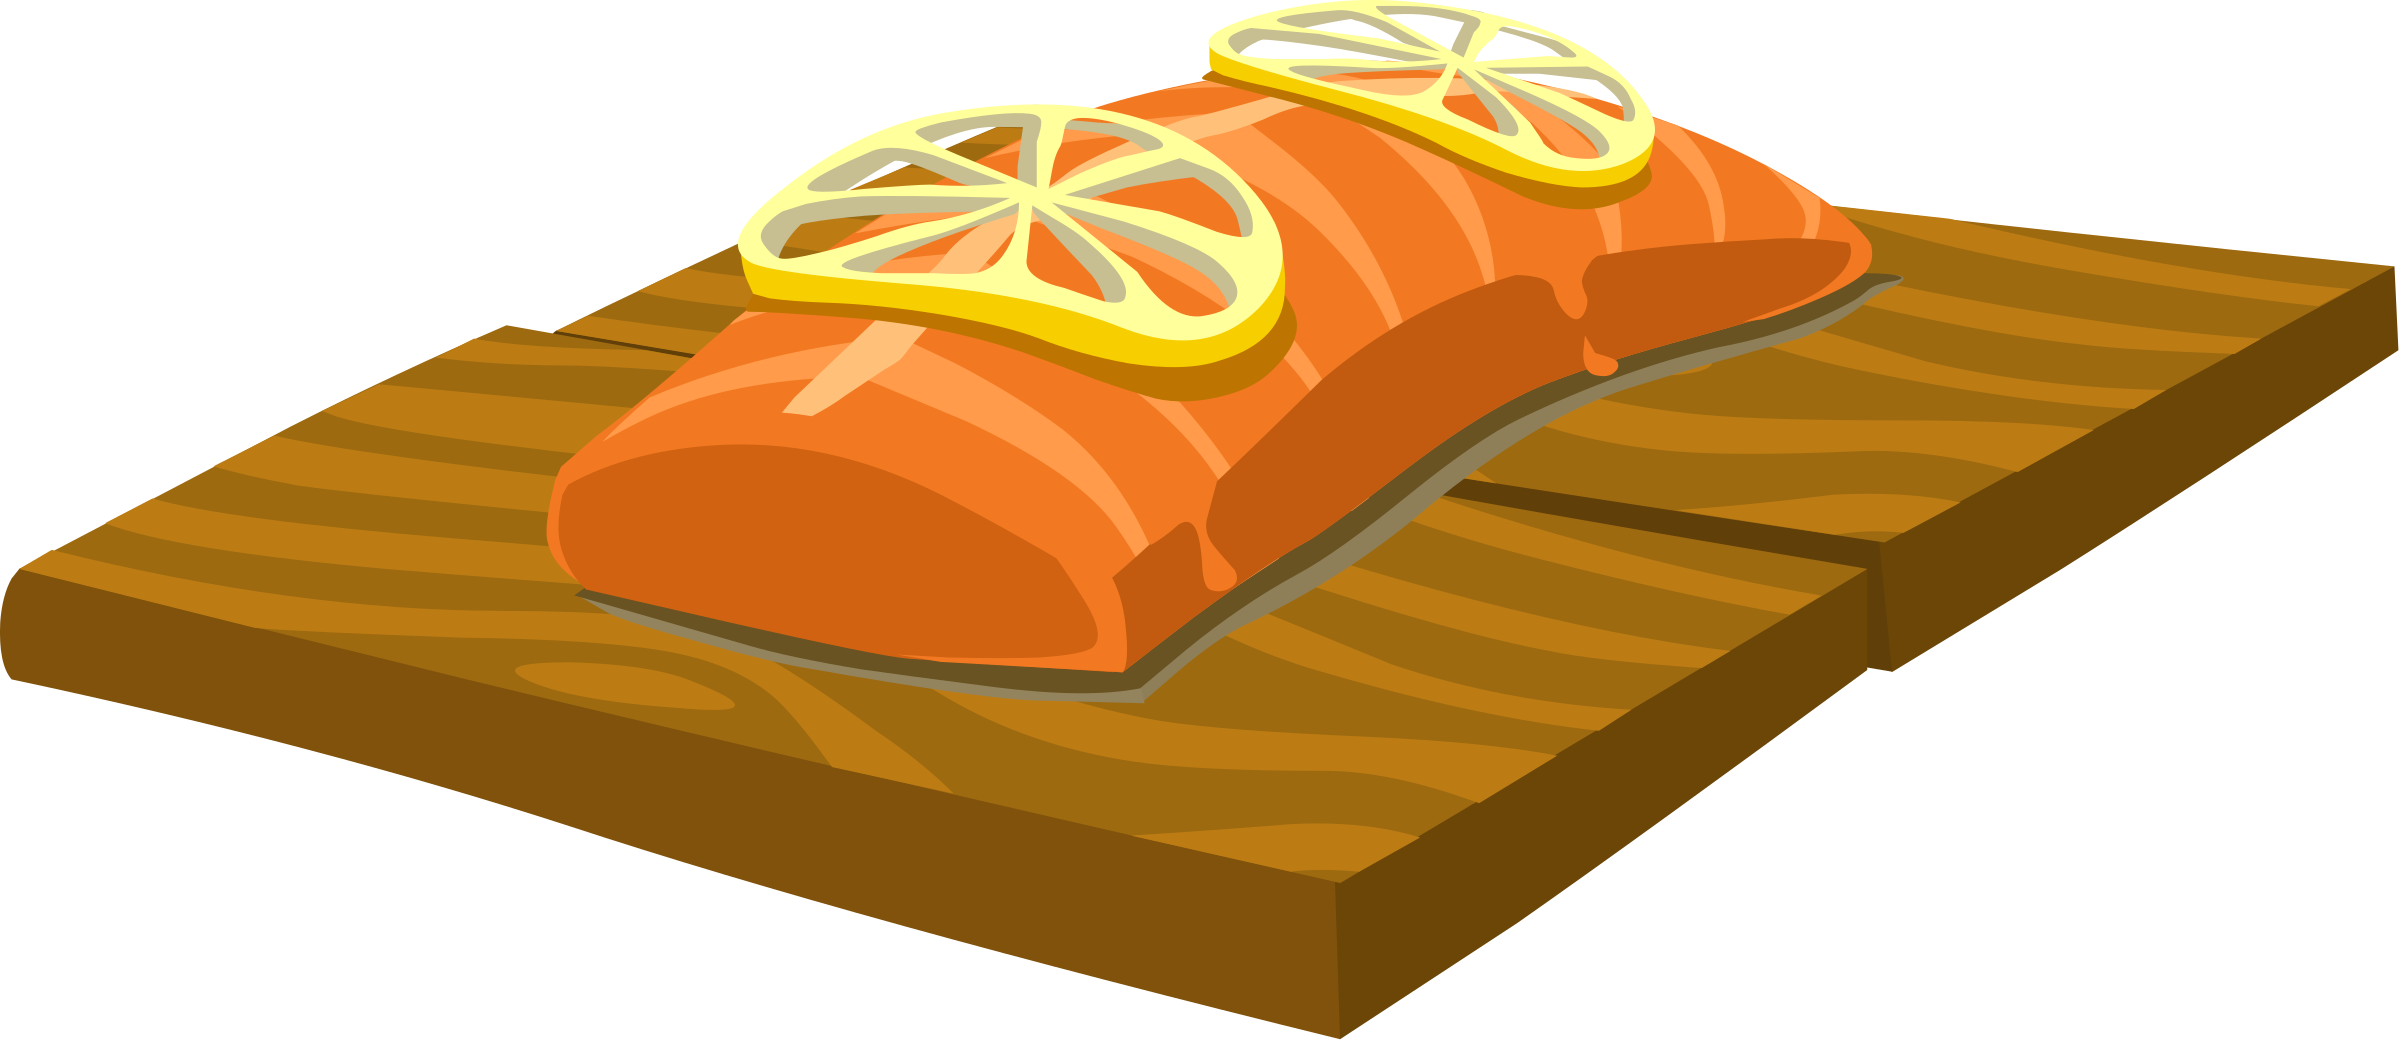 clipart grilled fish - photo #14